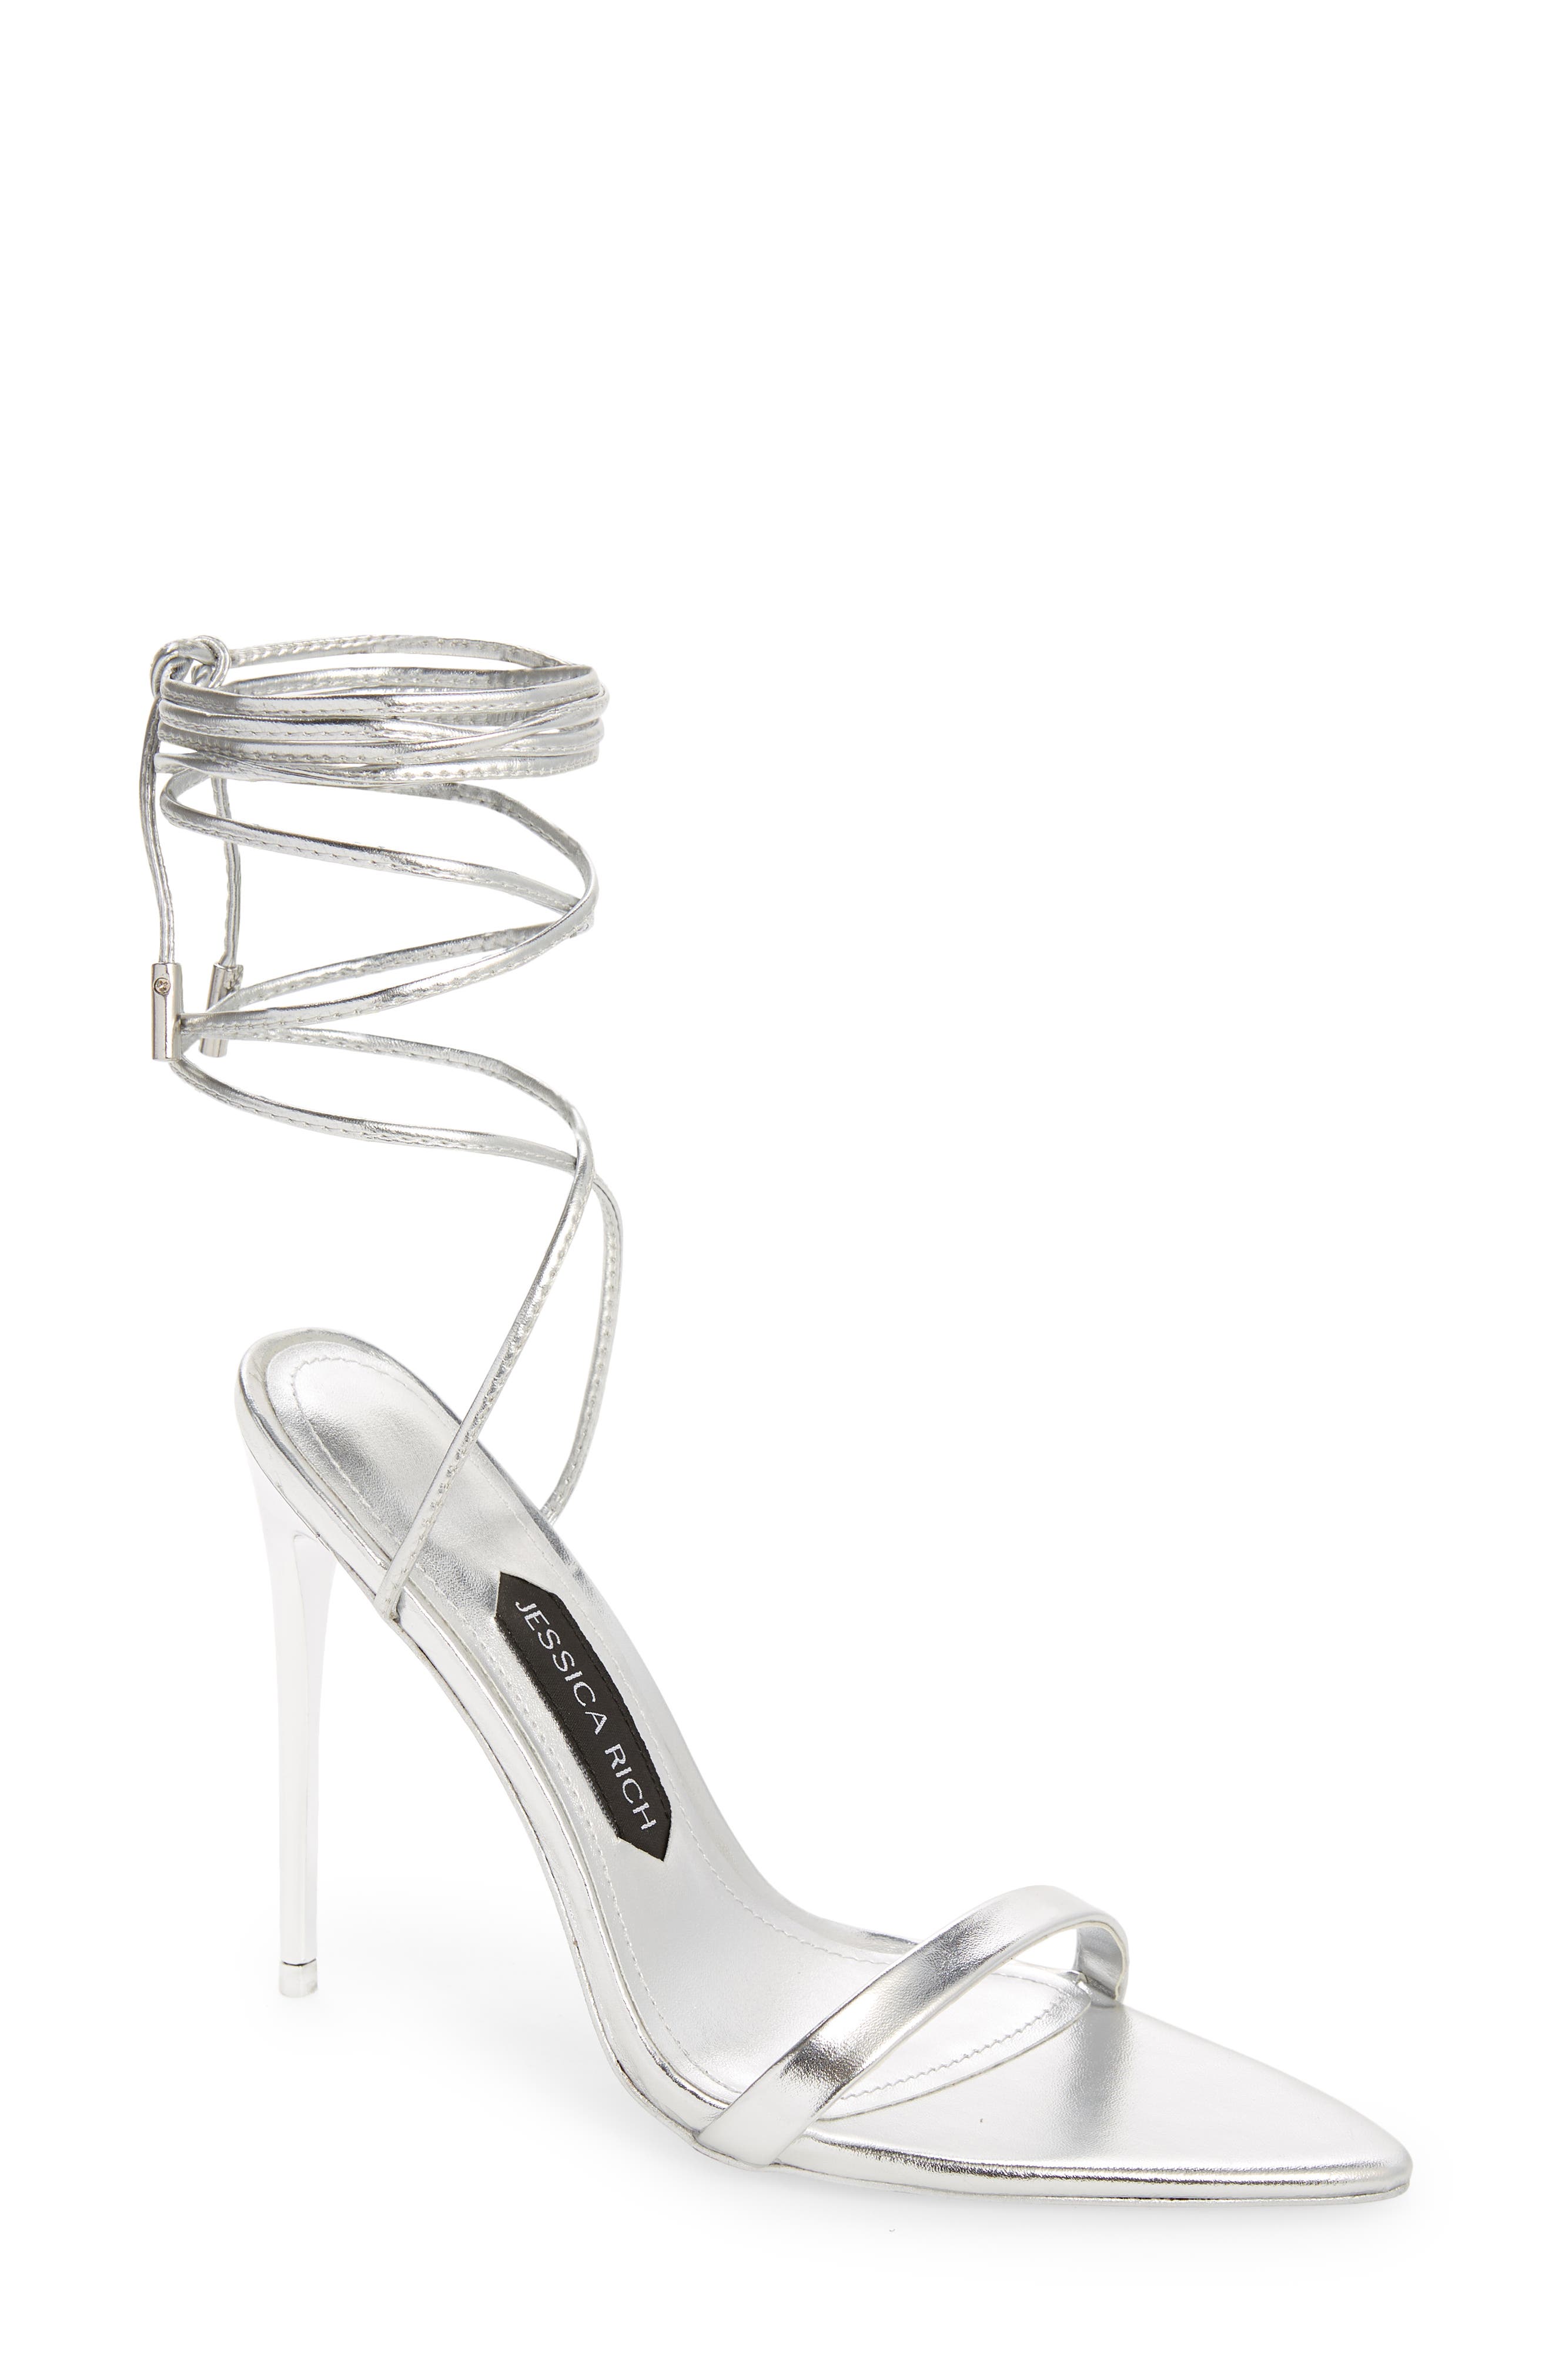 JESSICA RICH Ankle Strap Sandal in Silver